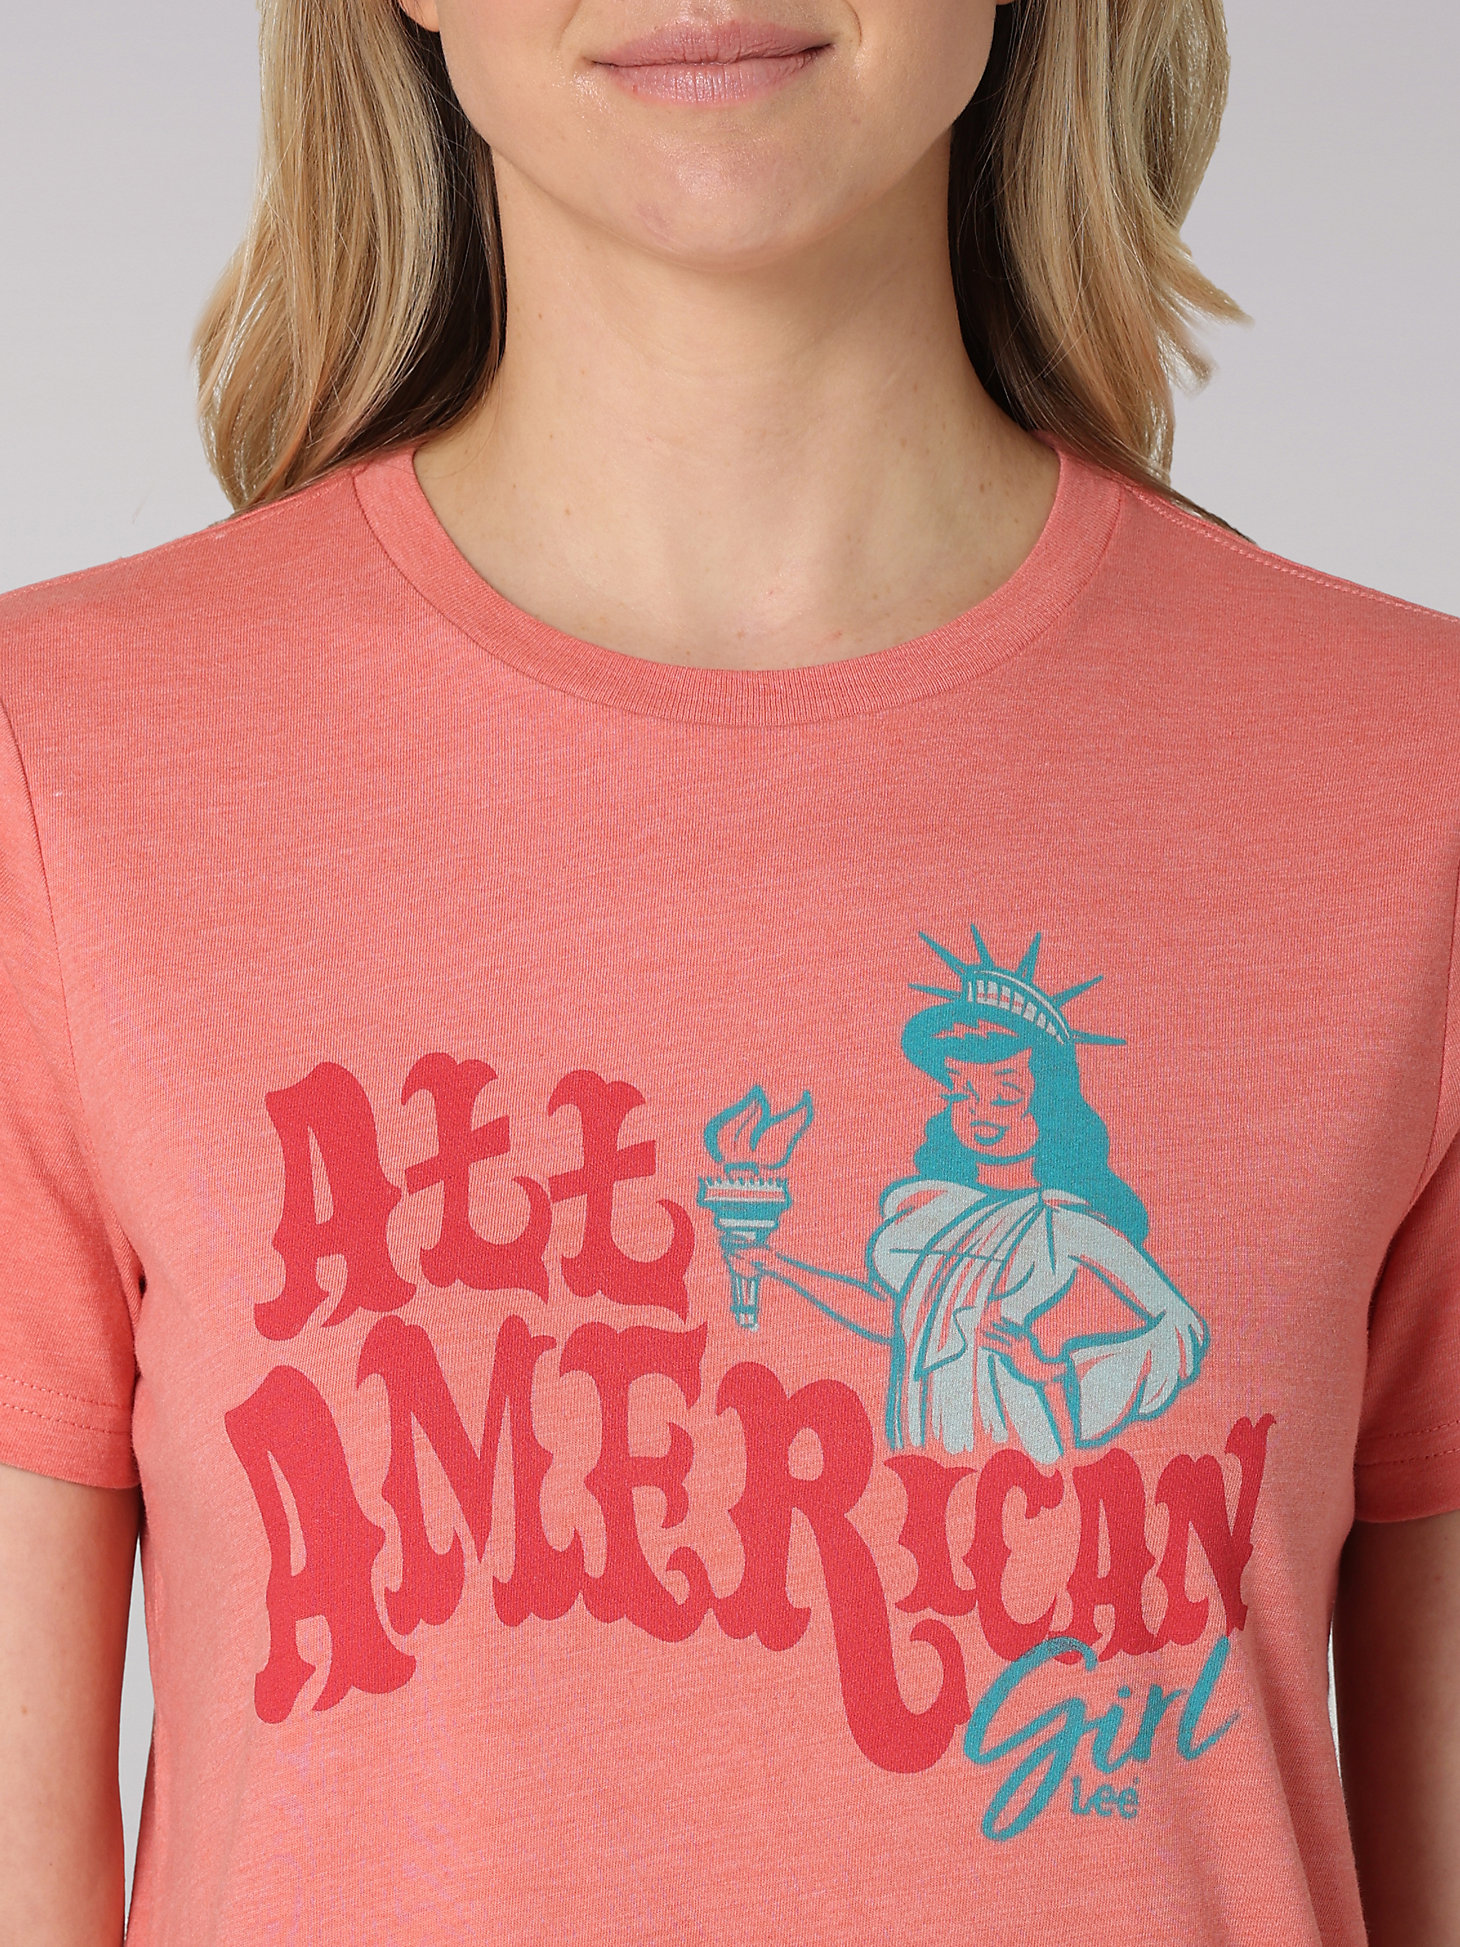 Women's Lee All American Graphic Tee in Envy Heather alternative view 2